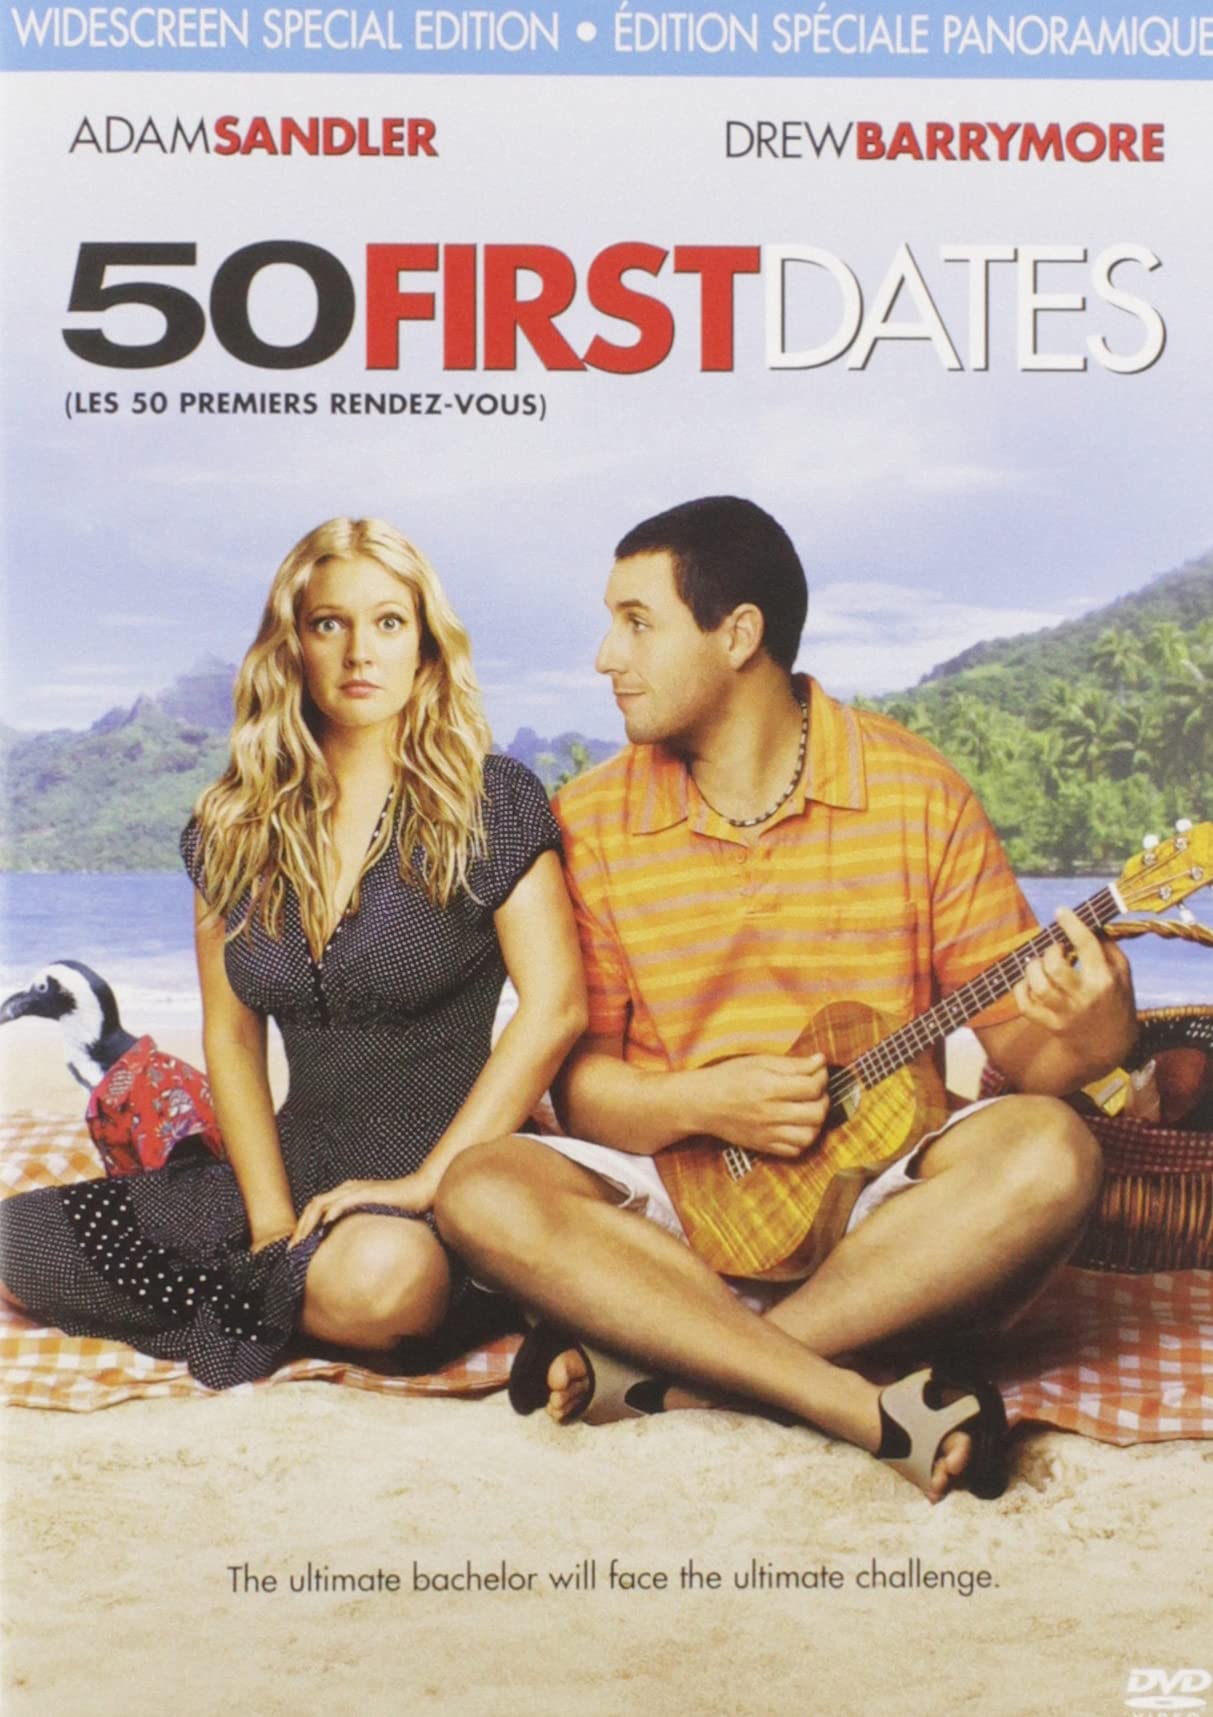 50 FIRST DATES on MovieShack